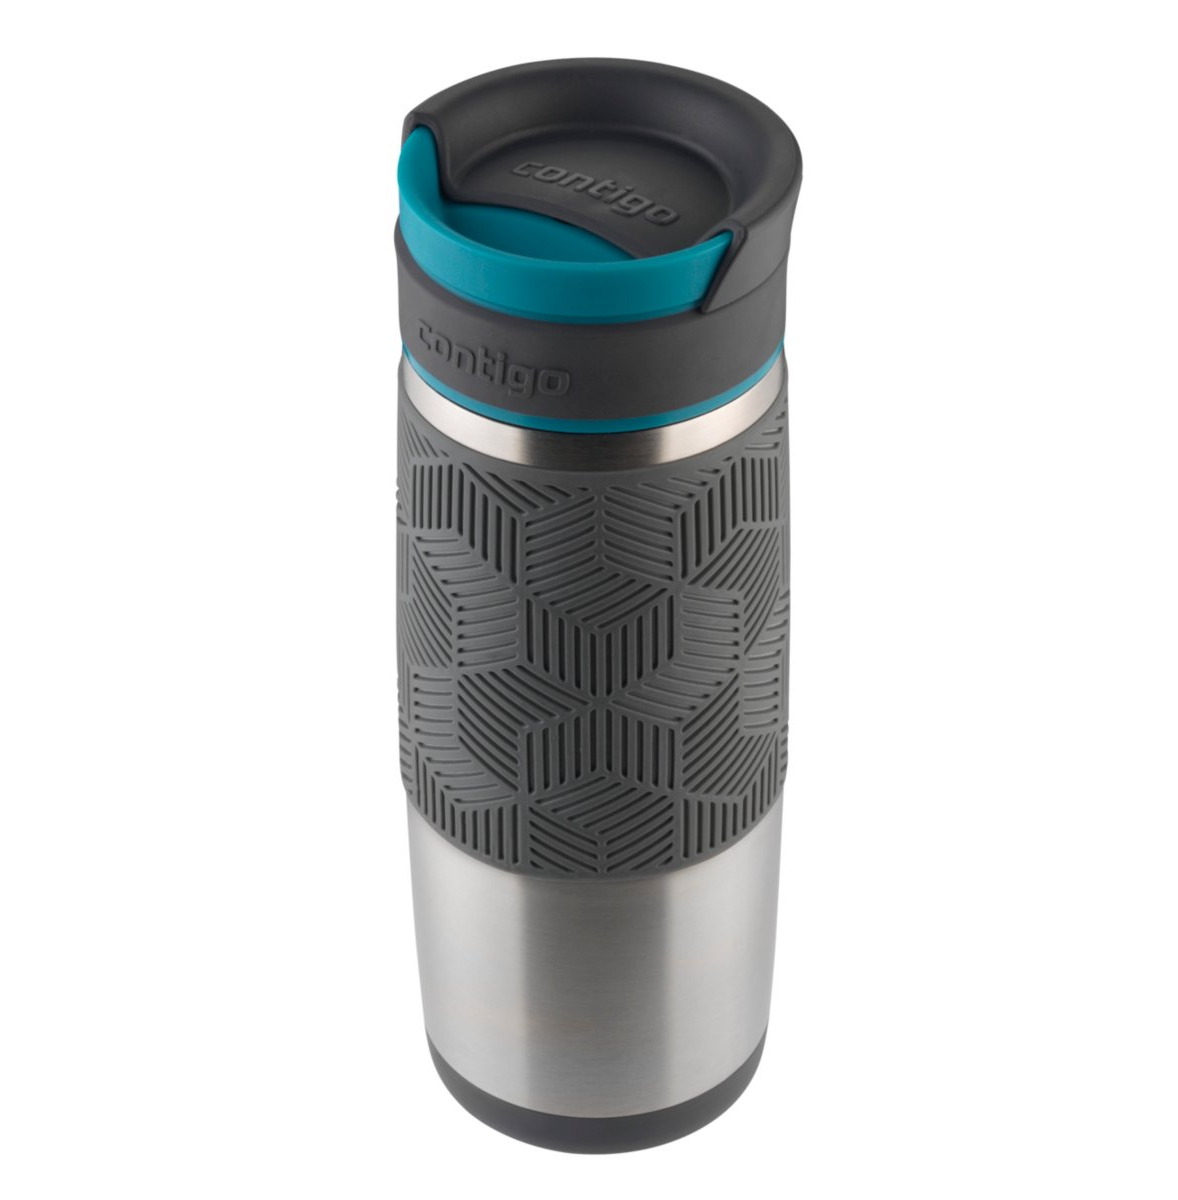 Contigo Stainless Steel Travel Mug with AUTOSEAL Lid and Handle